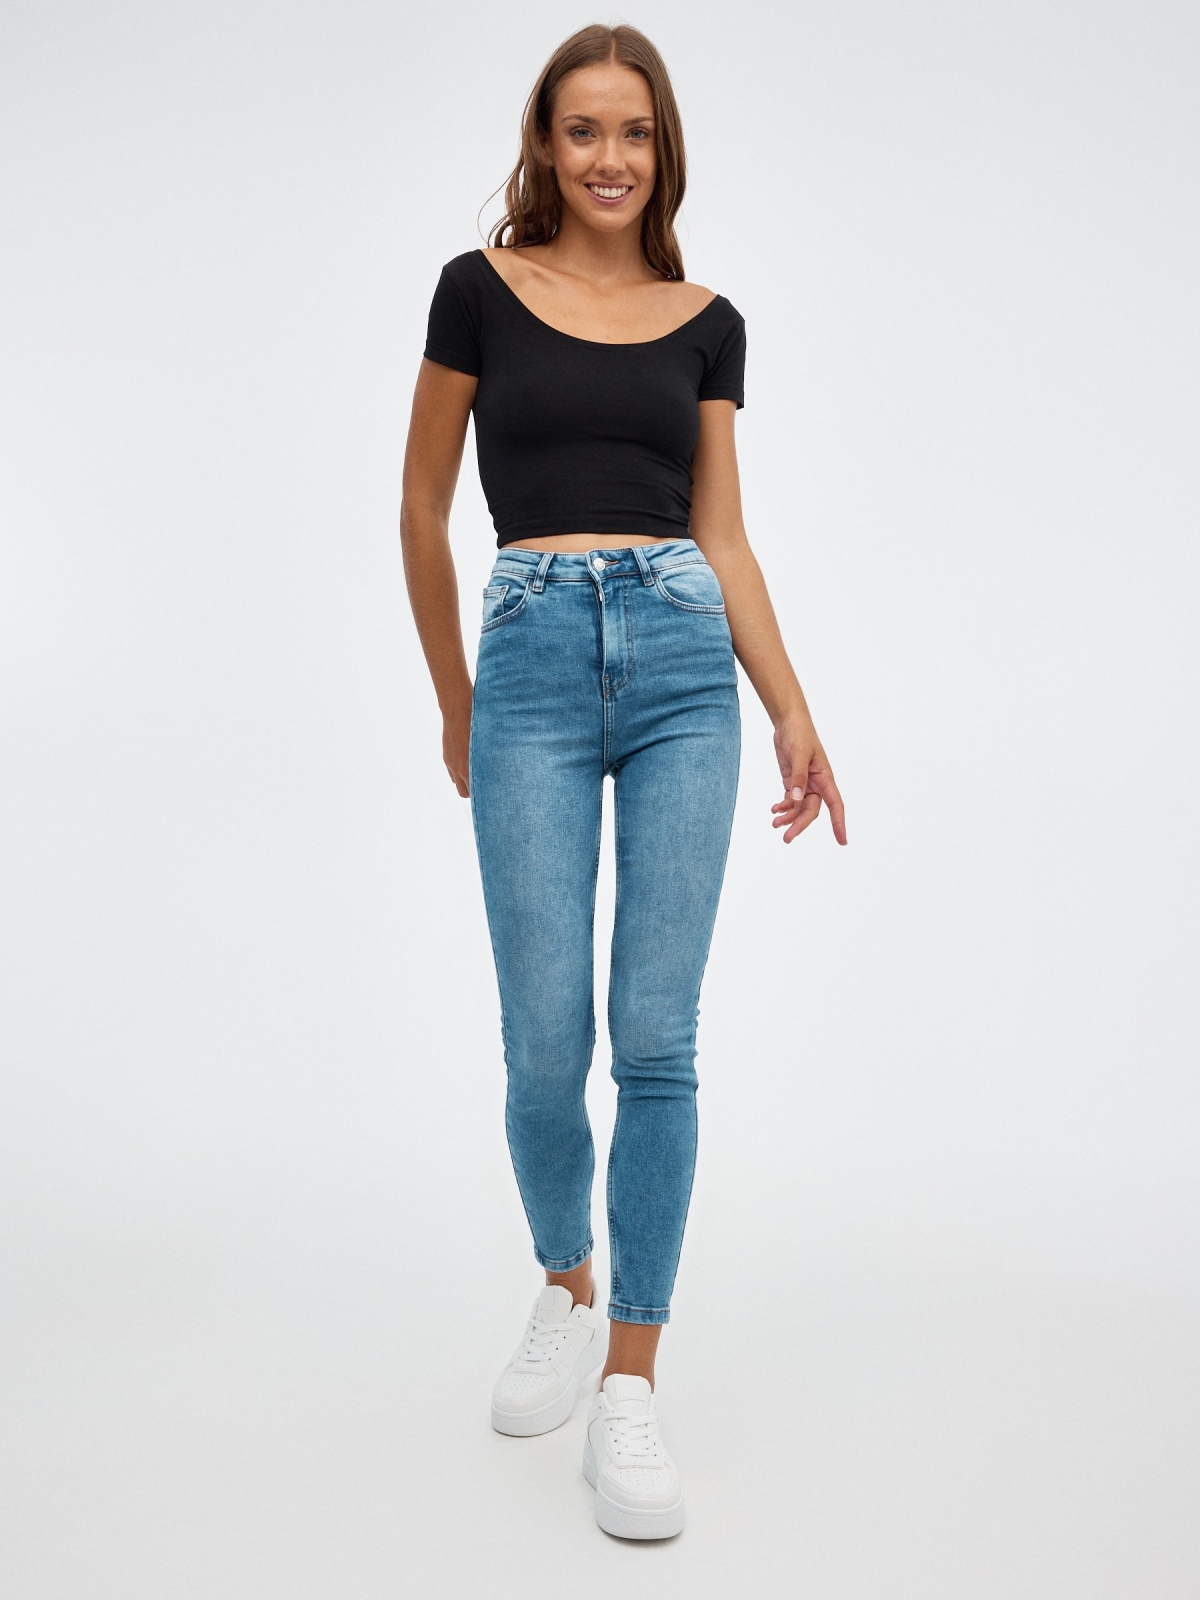 Denim skinny jeans high rise blue front view